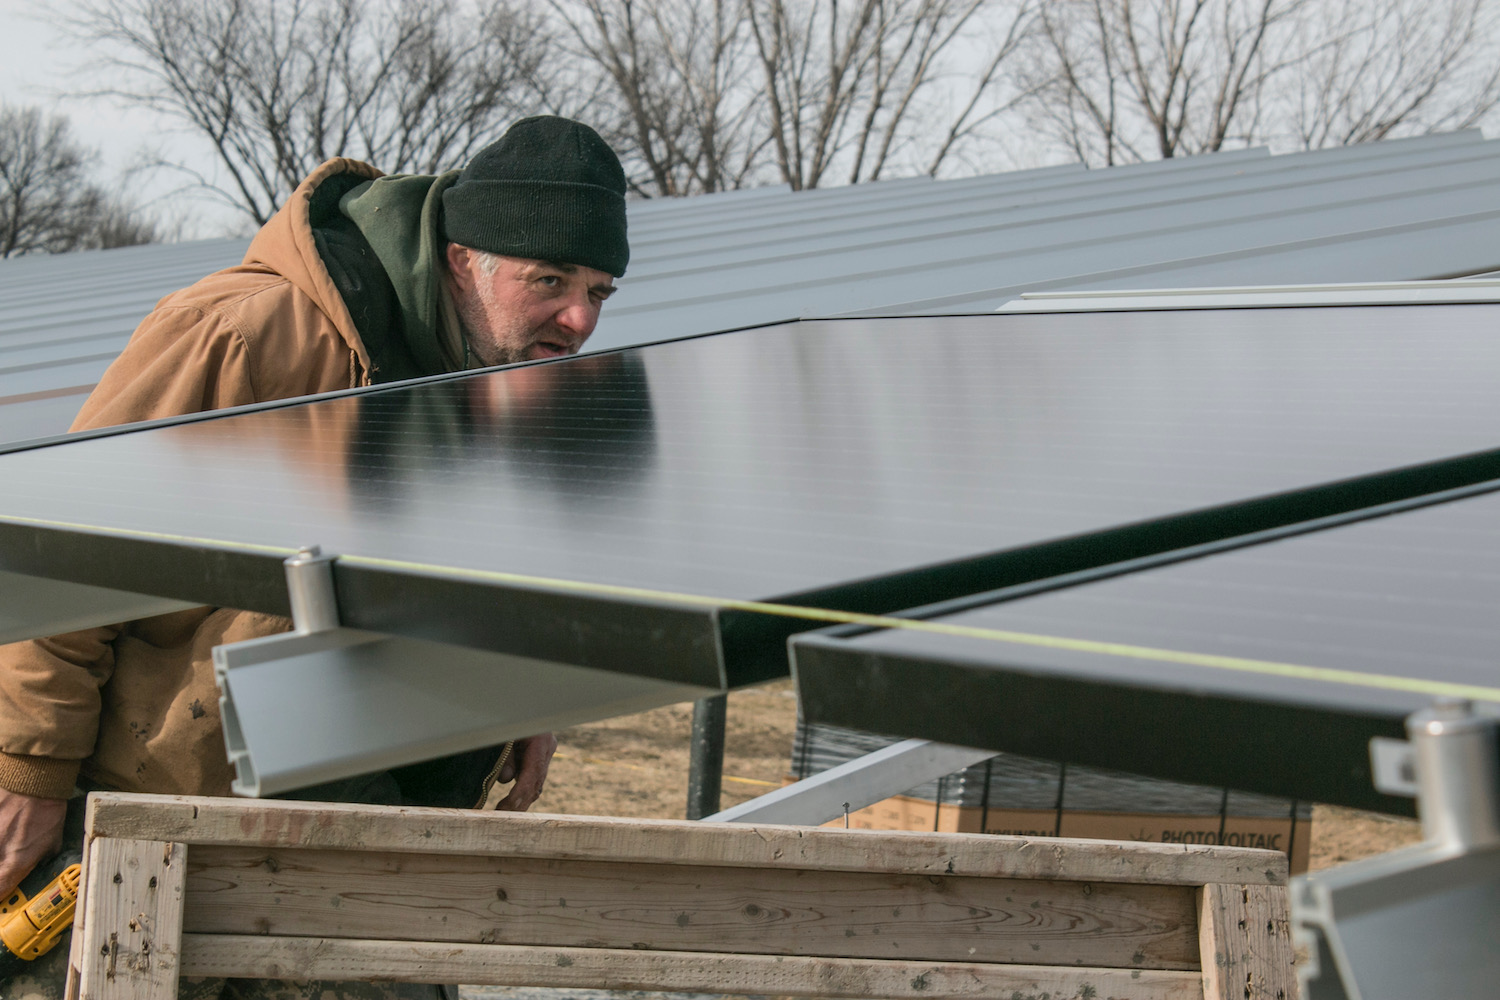 Winnebago Tribe sees power from solar energy as boost to sovereignty